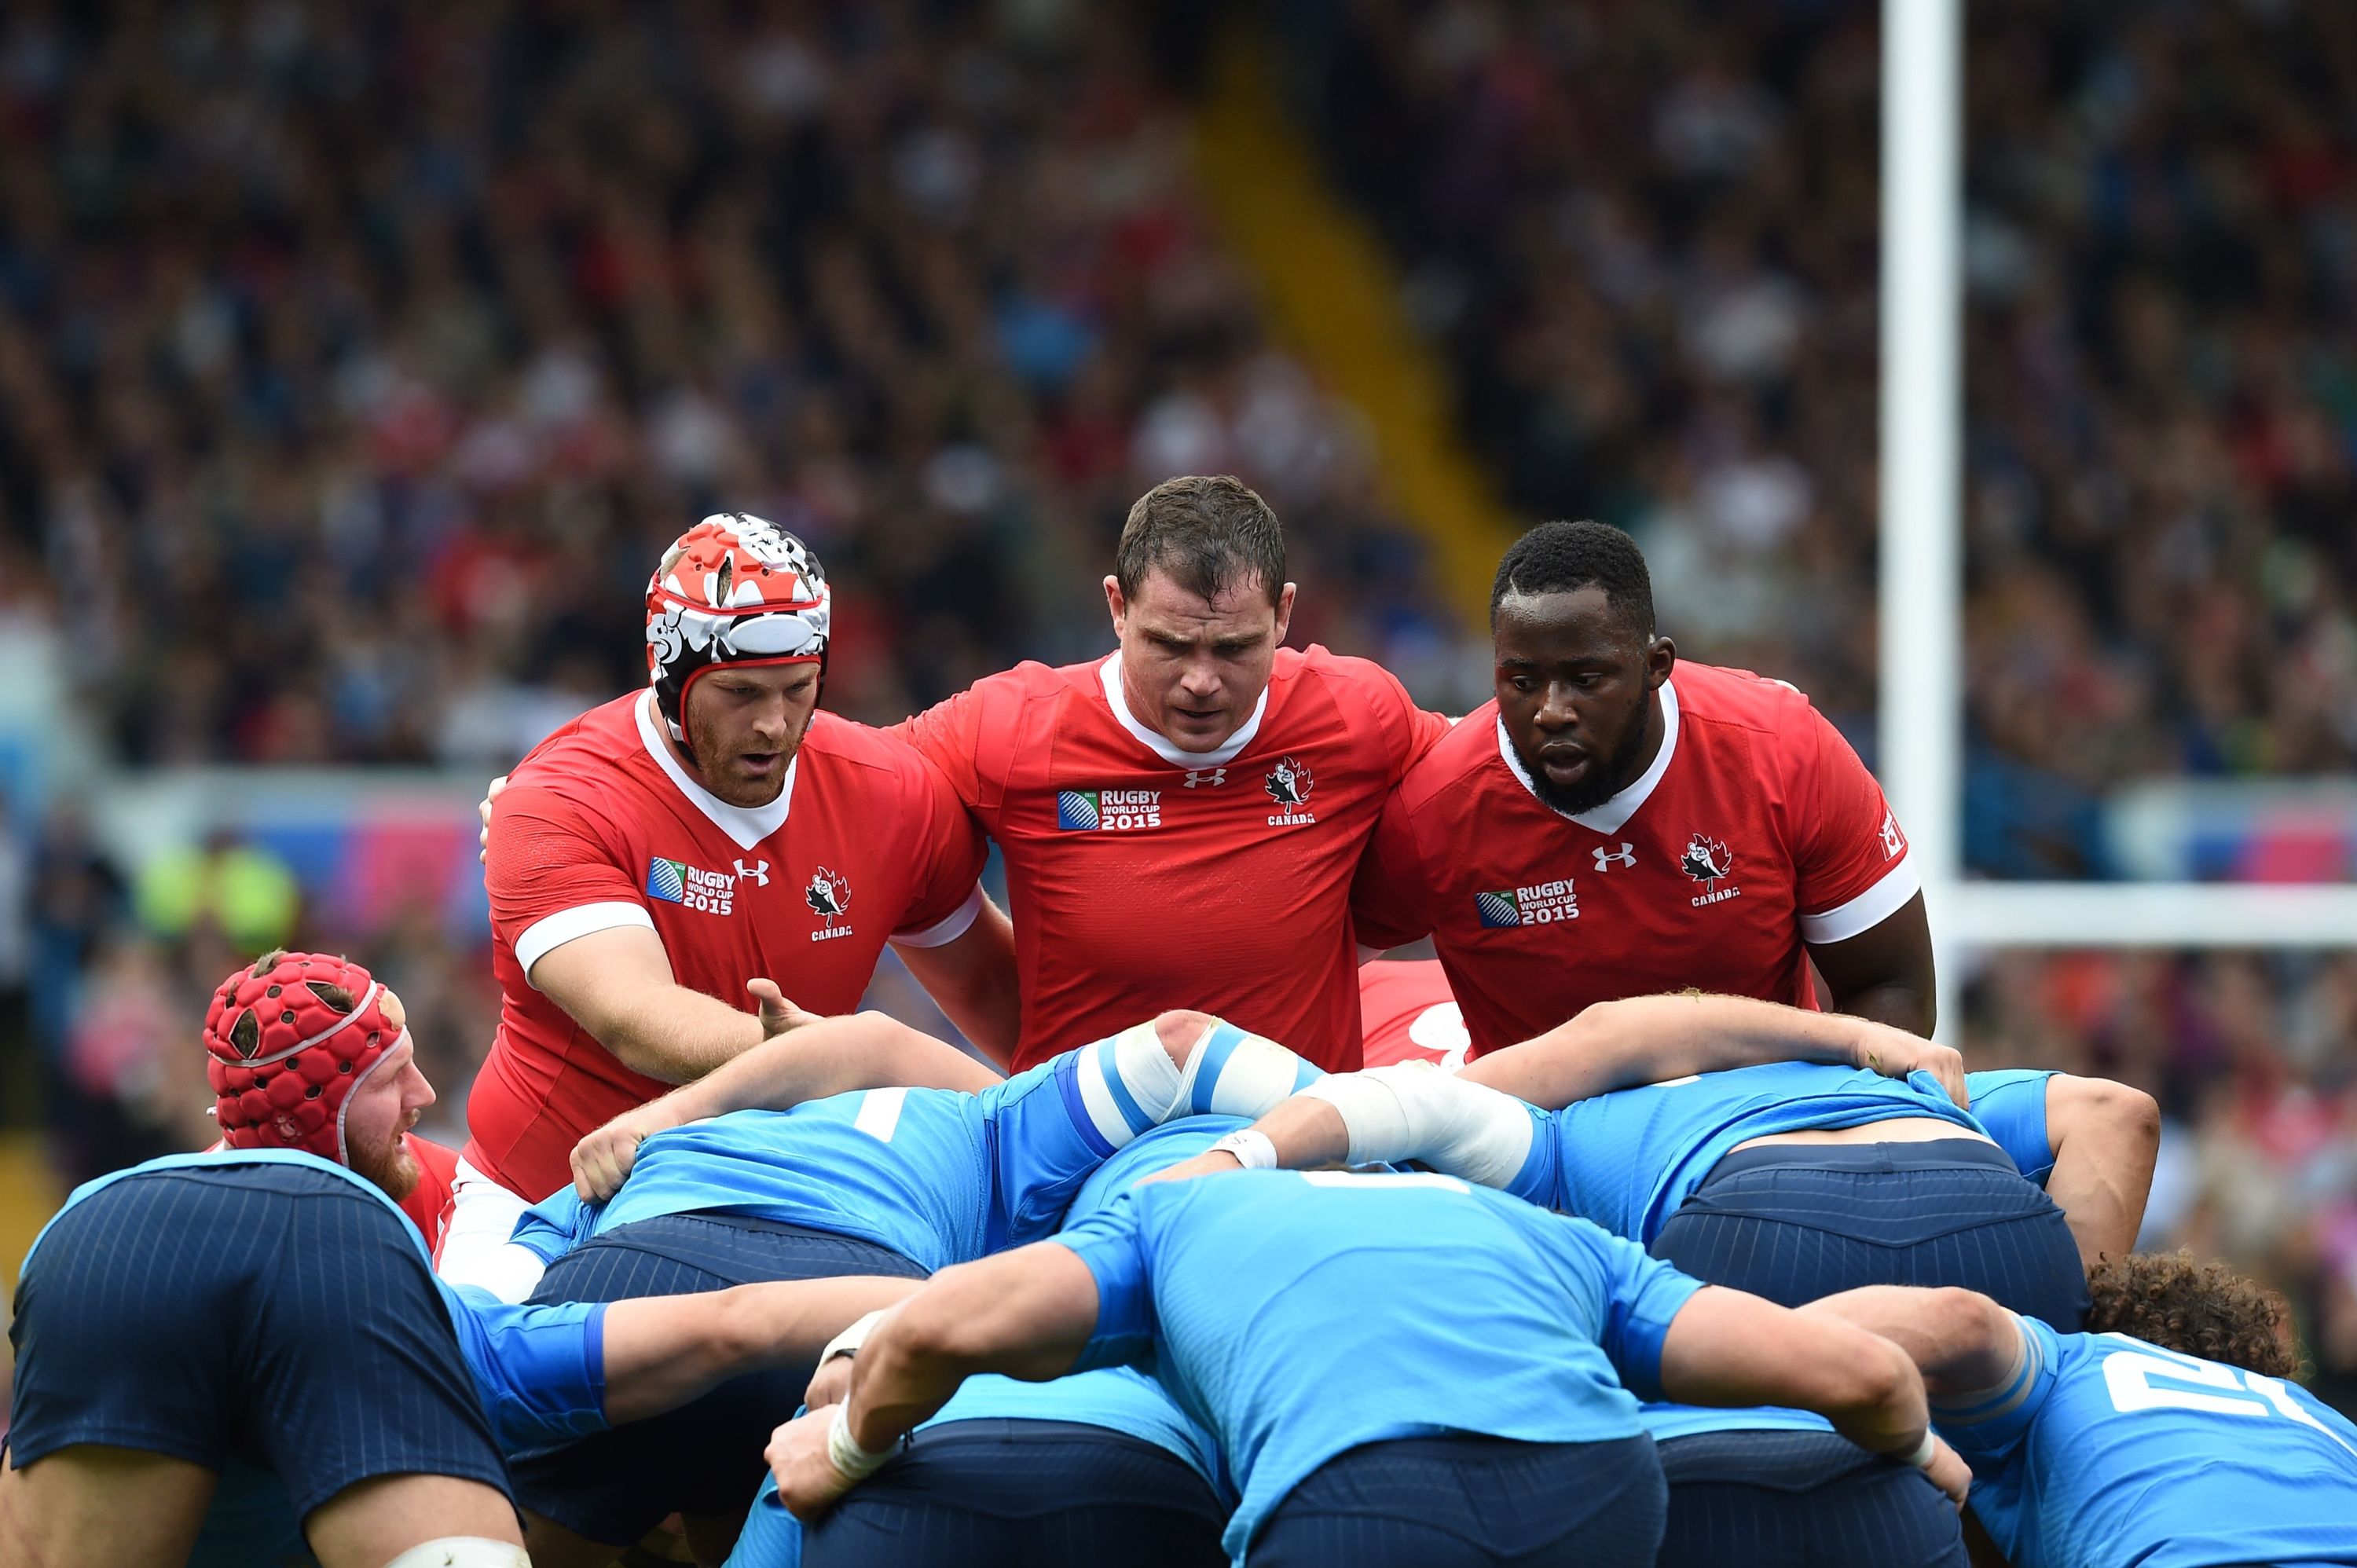 Canada's lock Jebb Sinclair (L), Canada's hooker Aaron Carpenter (C) and Canada's prop Djustice Sears-Duru (R) prepare for a scrum  during a Pool D match of the 2015 Rugby World Cup between Italy and Canada at Elland Road in Leeds, north England, on September 26, 2015.  AFP PHOTO / PAUL ELLIS RESTRICTED TO EDITORIAL USE, NO USE IN LIVE MATCH TRACKING SERVICES, TO BE USED AS NON-SEQUENTIAL STILLS        (Photo credit should read PAUL ELLIS/AFP/Getty Images)